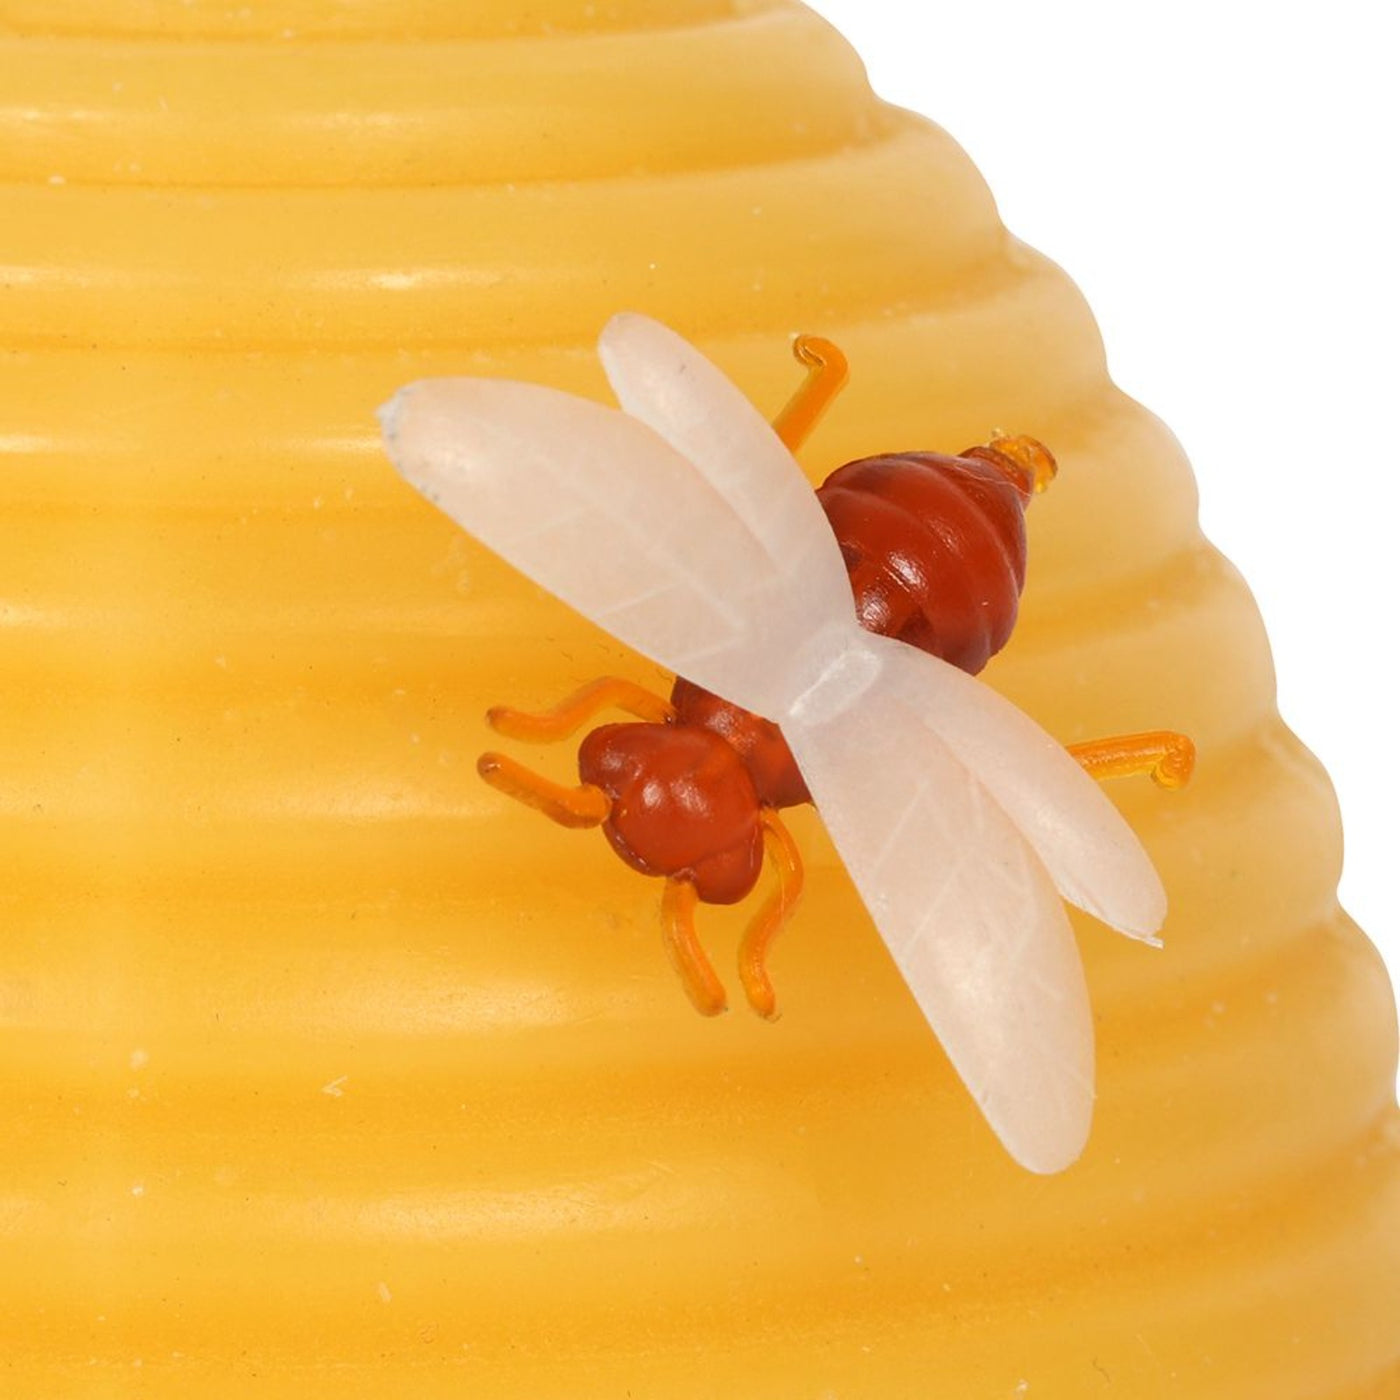 Beeswax Hive Shaped Candle